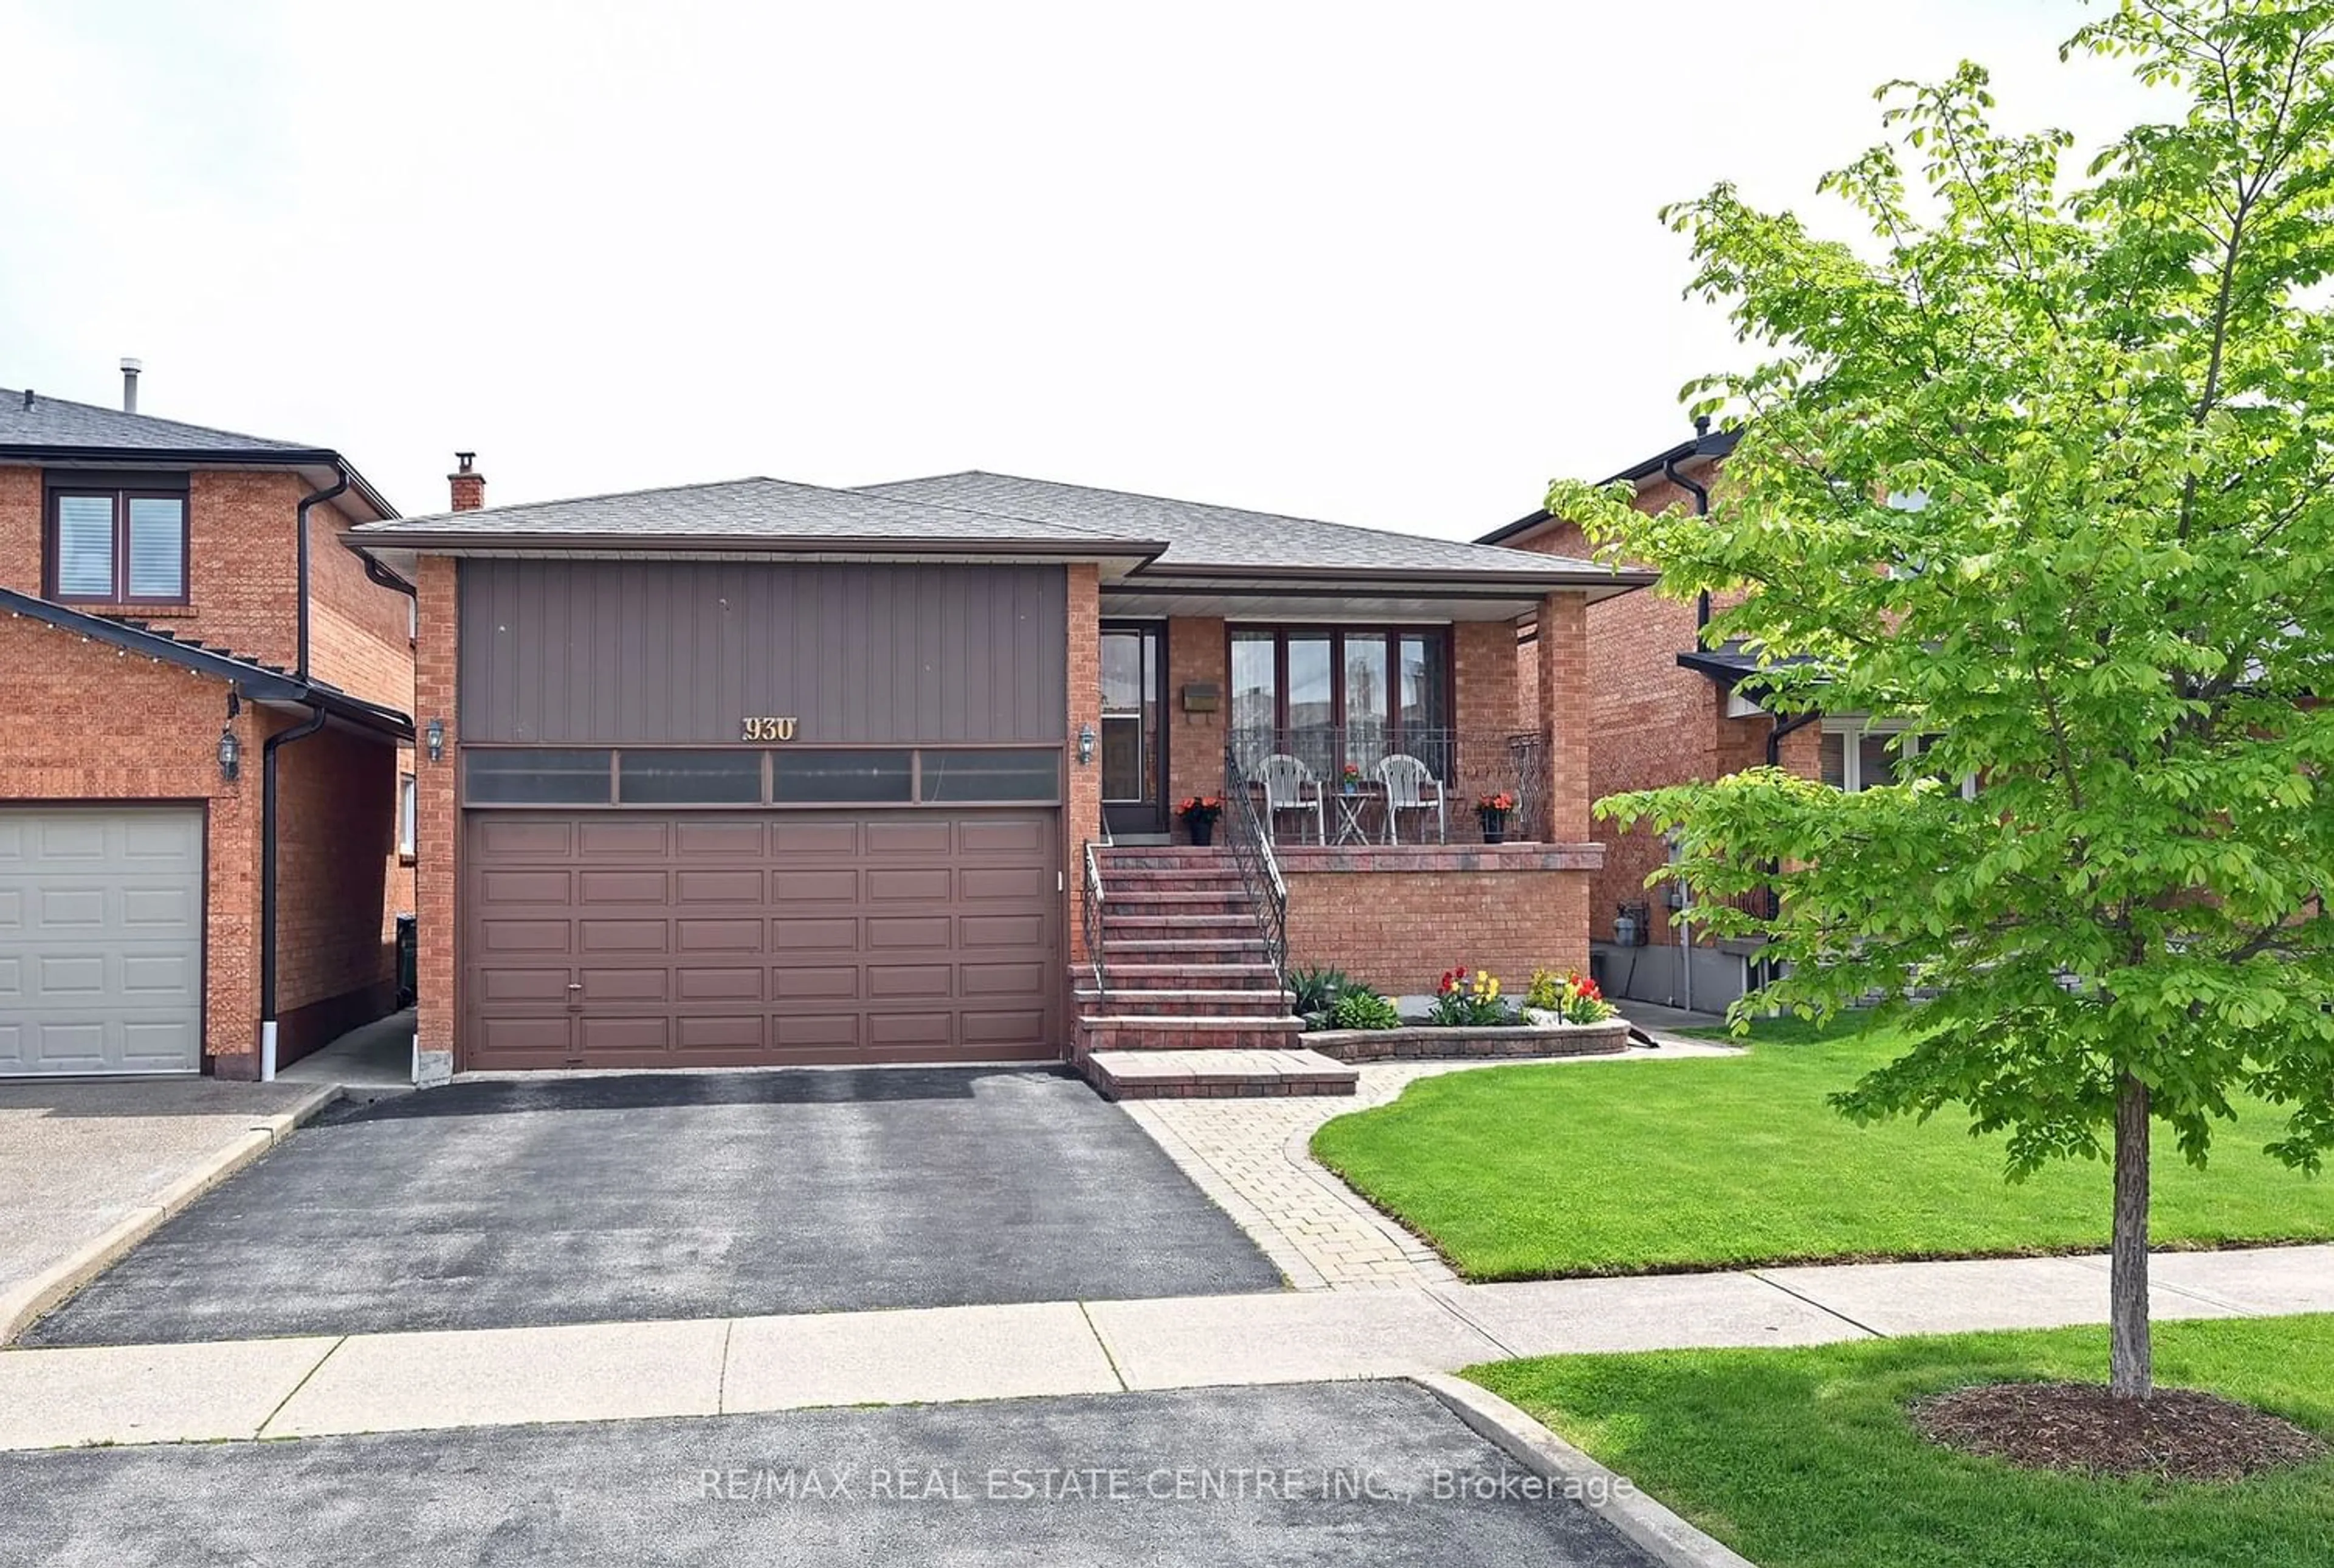 Home with brick exterior material for 930 Wetherby Lane, Mississauga Ontario L4W 4S7